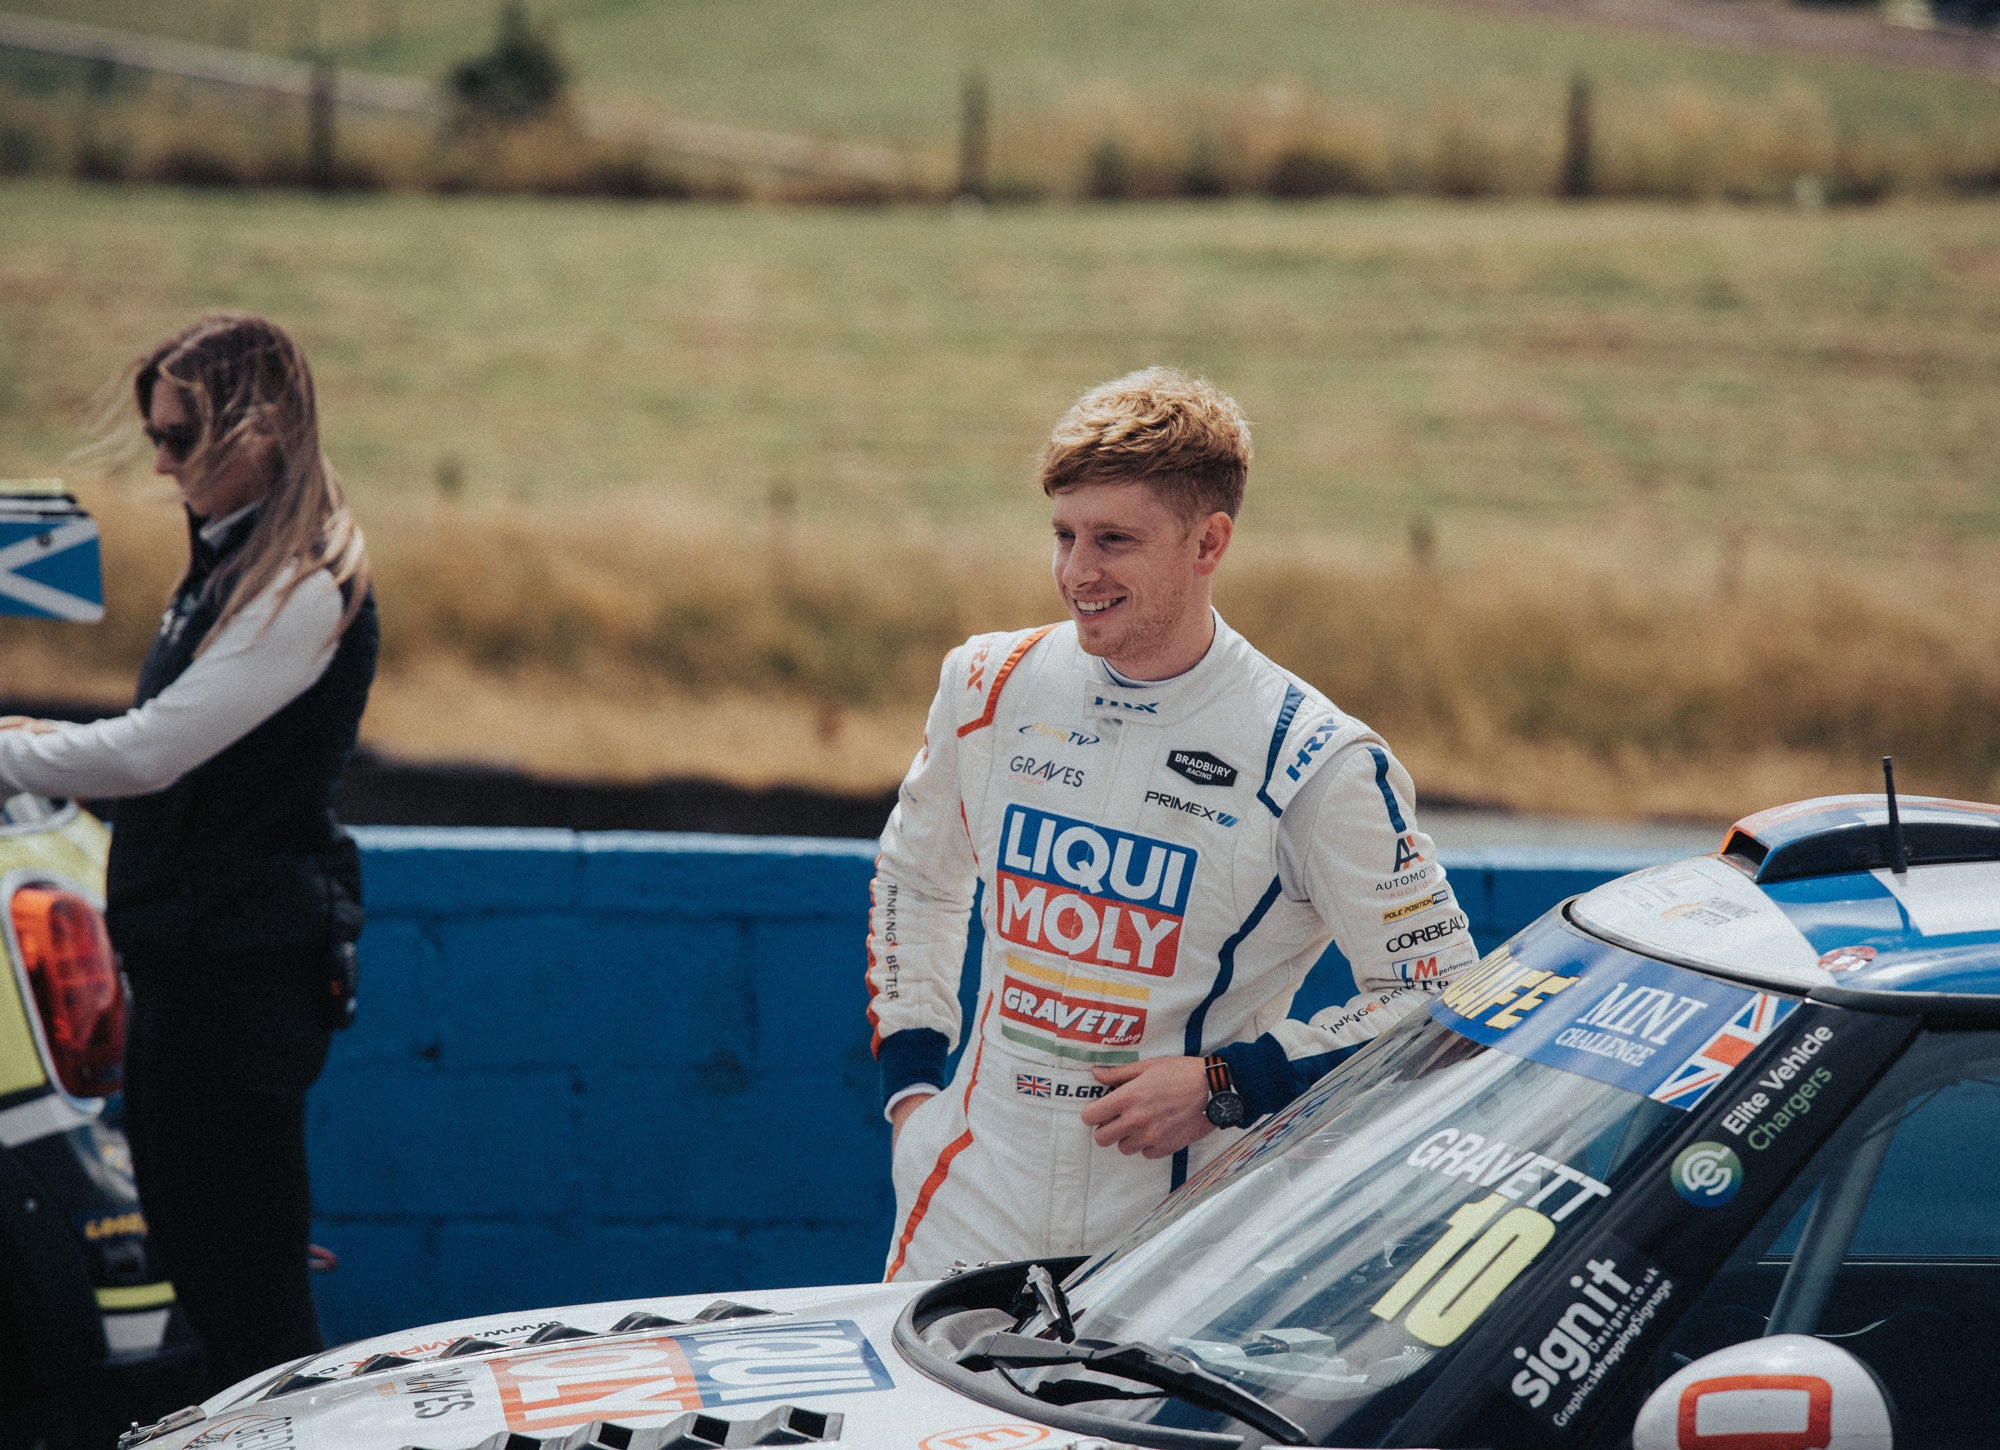 Bradley Gravett son of BTCC British Touring Car Champion Robb Gravett in the MINI Challenge JCW Series at Knockhill in 2022 Bradley Getting Ready in Assembly Area Graves Motorsport Cooper Racing Driver LIQUI MOLY LM Performance Thinking it Better